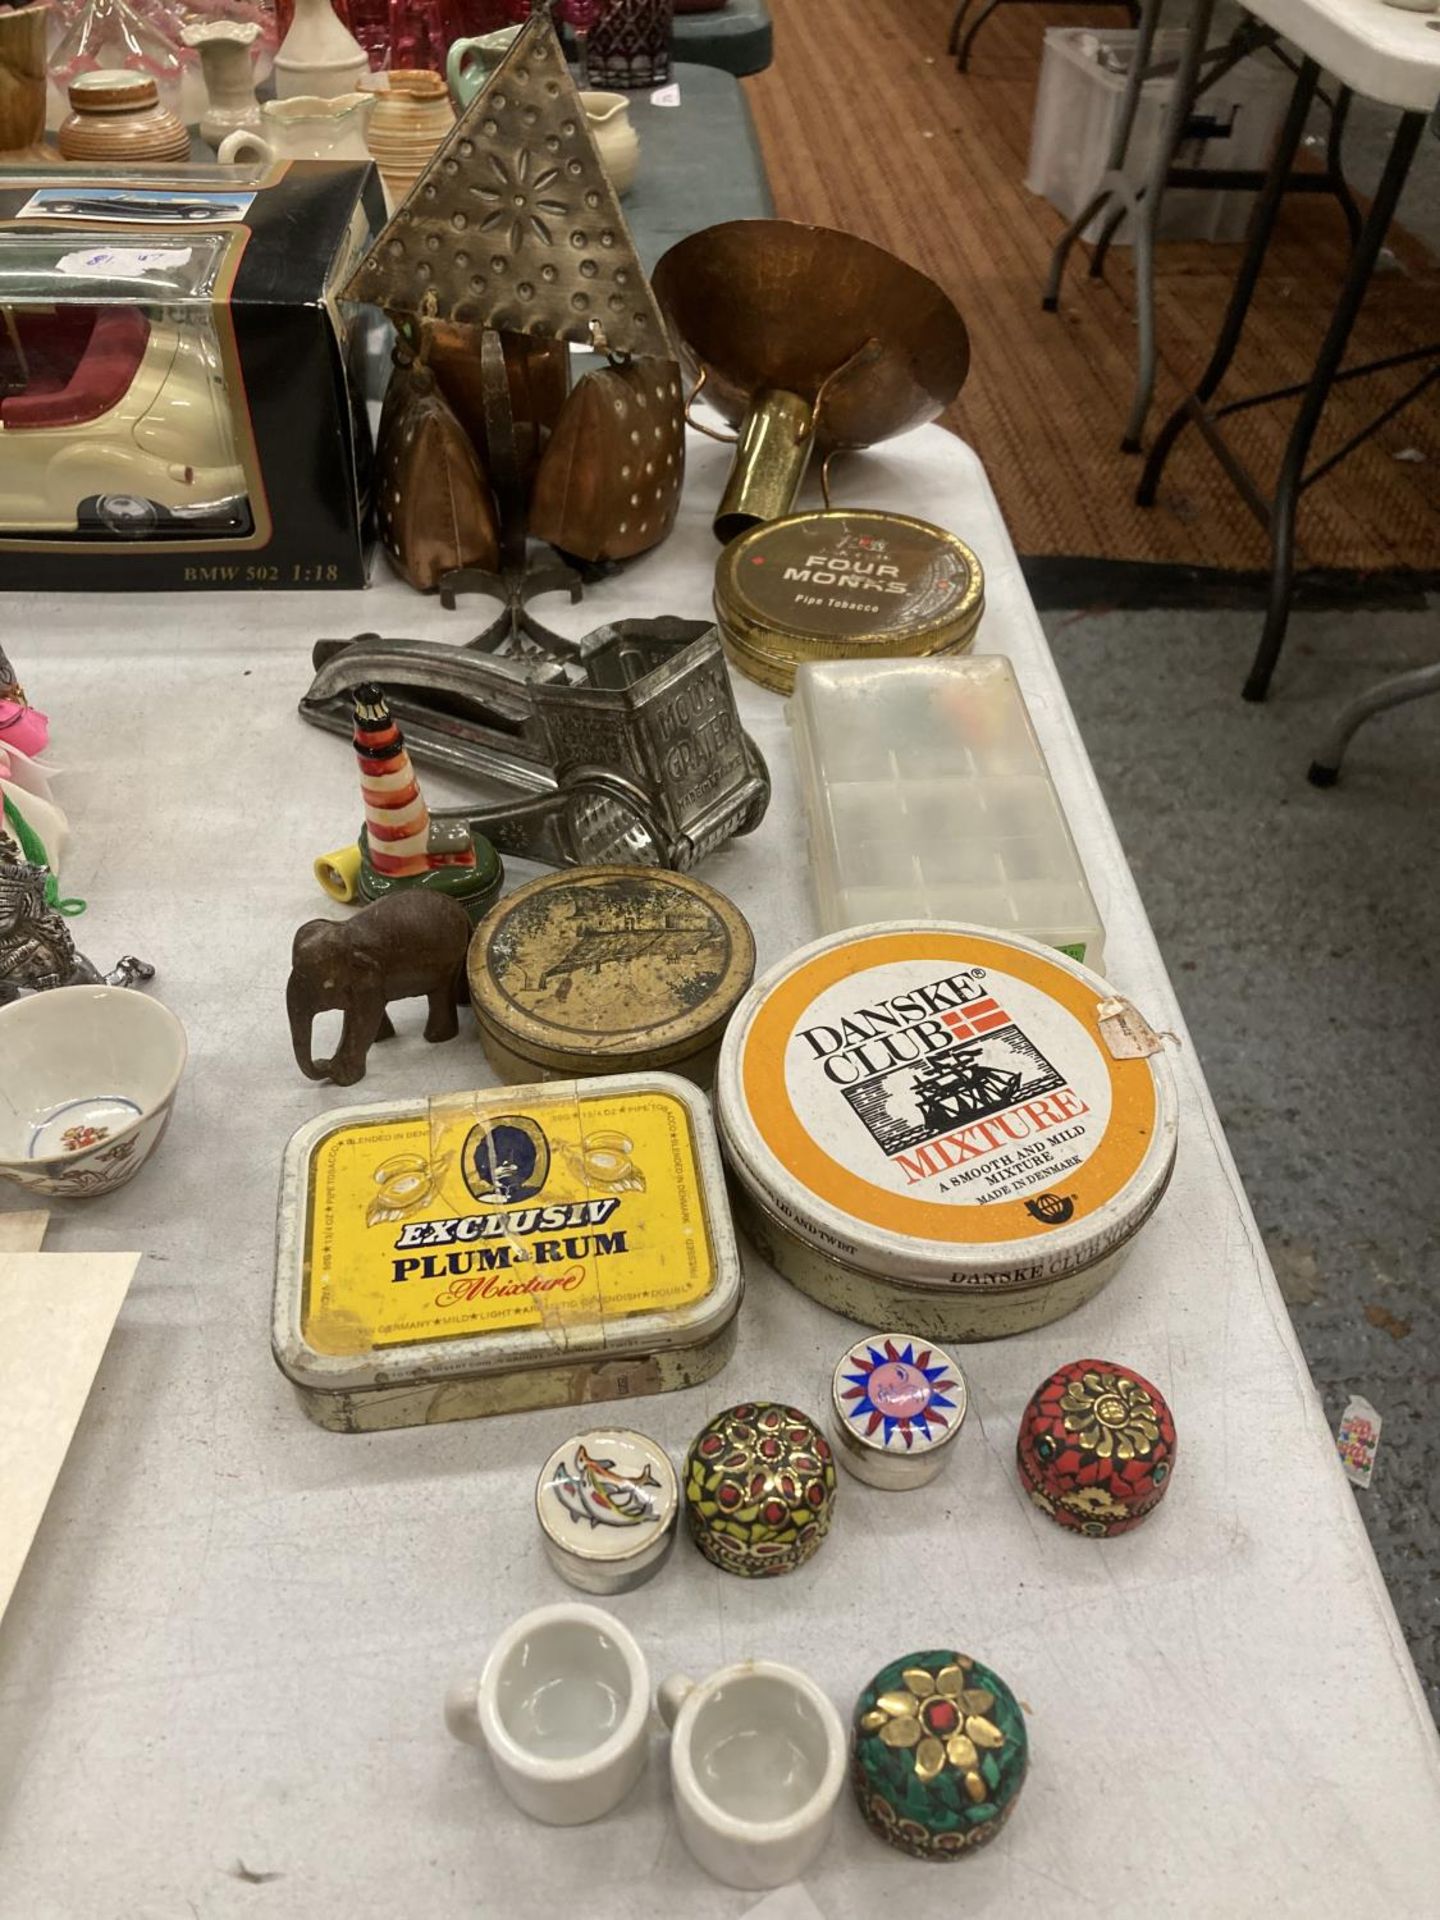 A MIXED LOT TO INCLUDE VINTAGE TINS, JEWELLED TRINKET POTS, WINDCHIME, WOODEN ELEPHANT, ETC.,